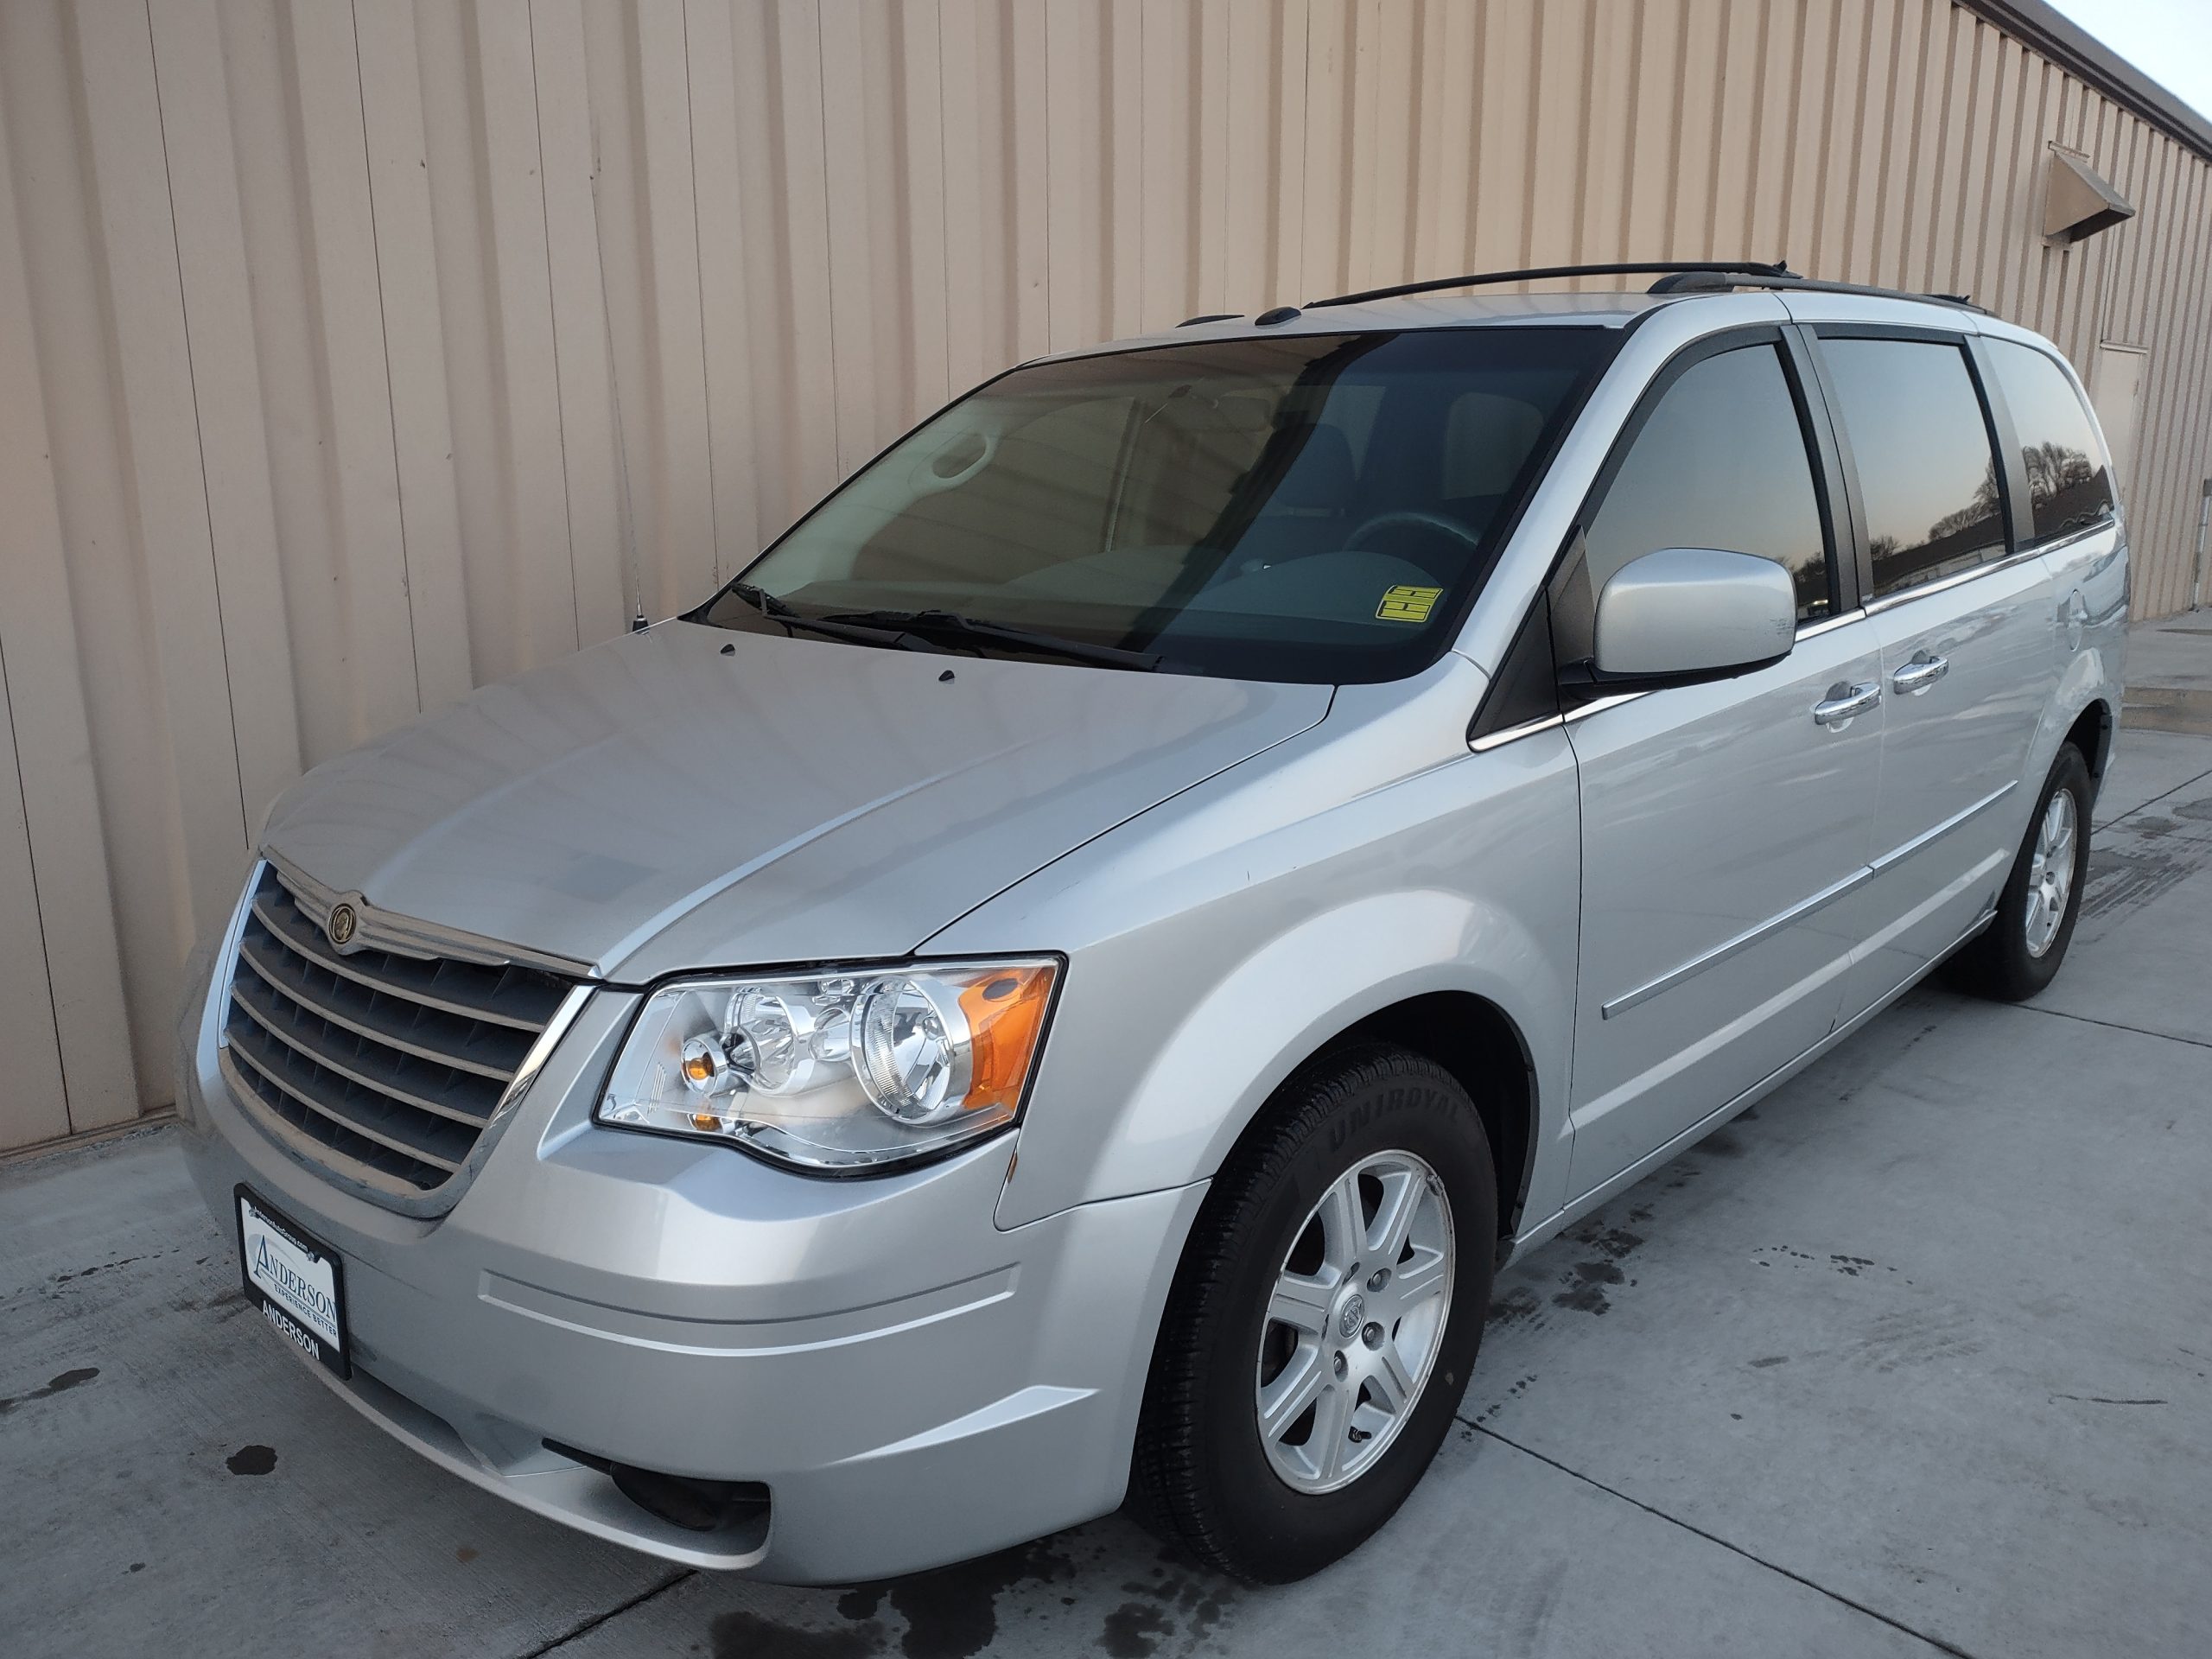 Used 2009 Chrysler Town & Country Touring Minivan for sale in 